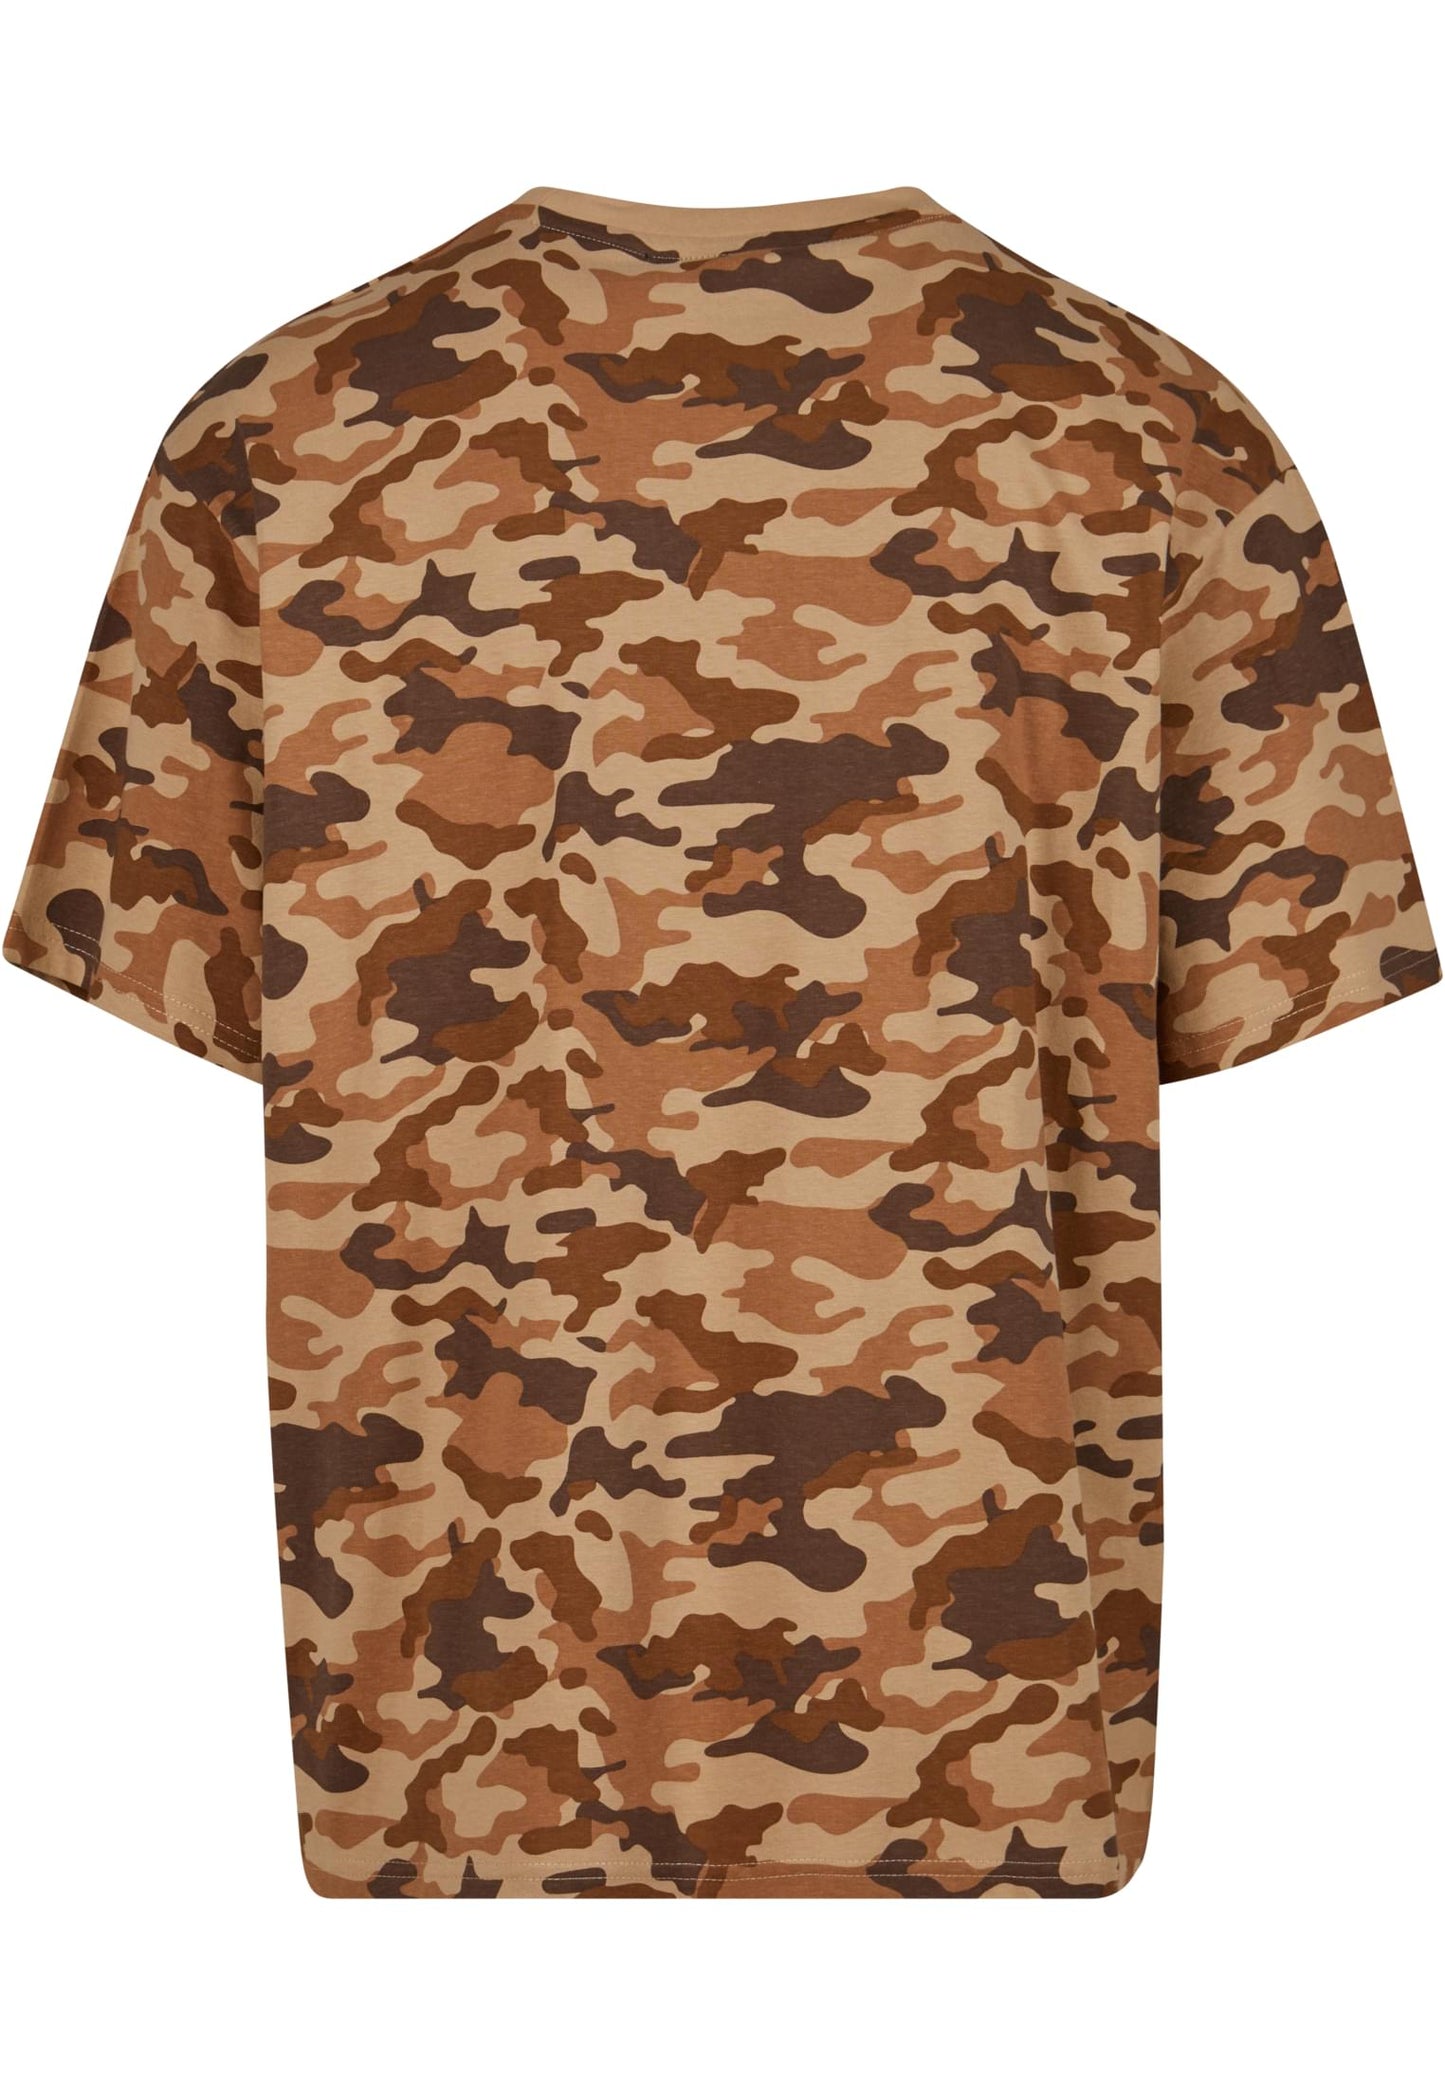 Ecko Unltd. Embroidery T-Shirt camouflage/camel/brown